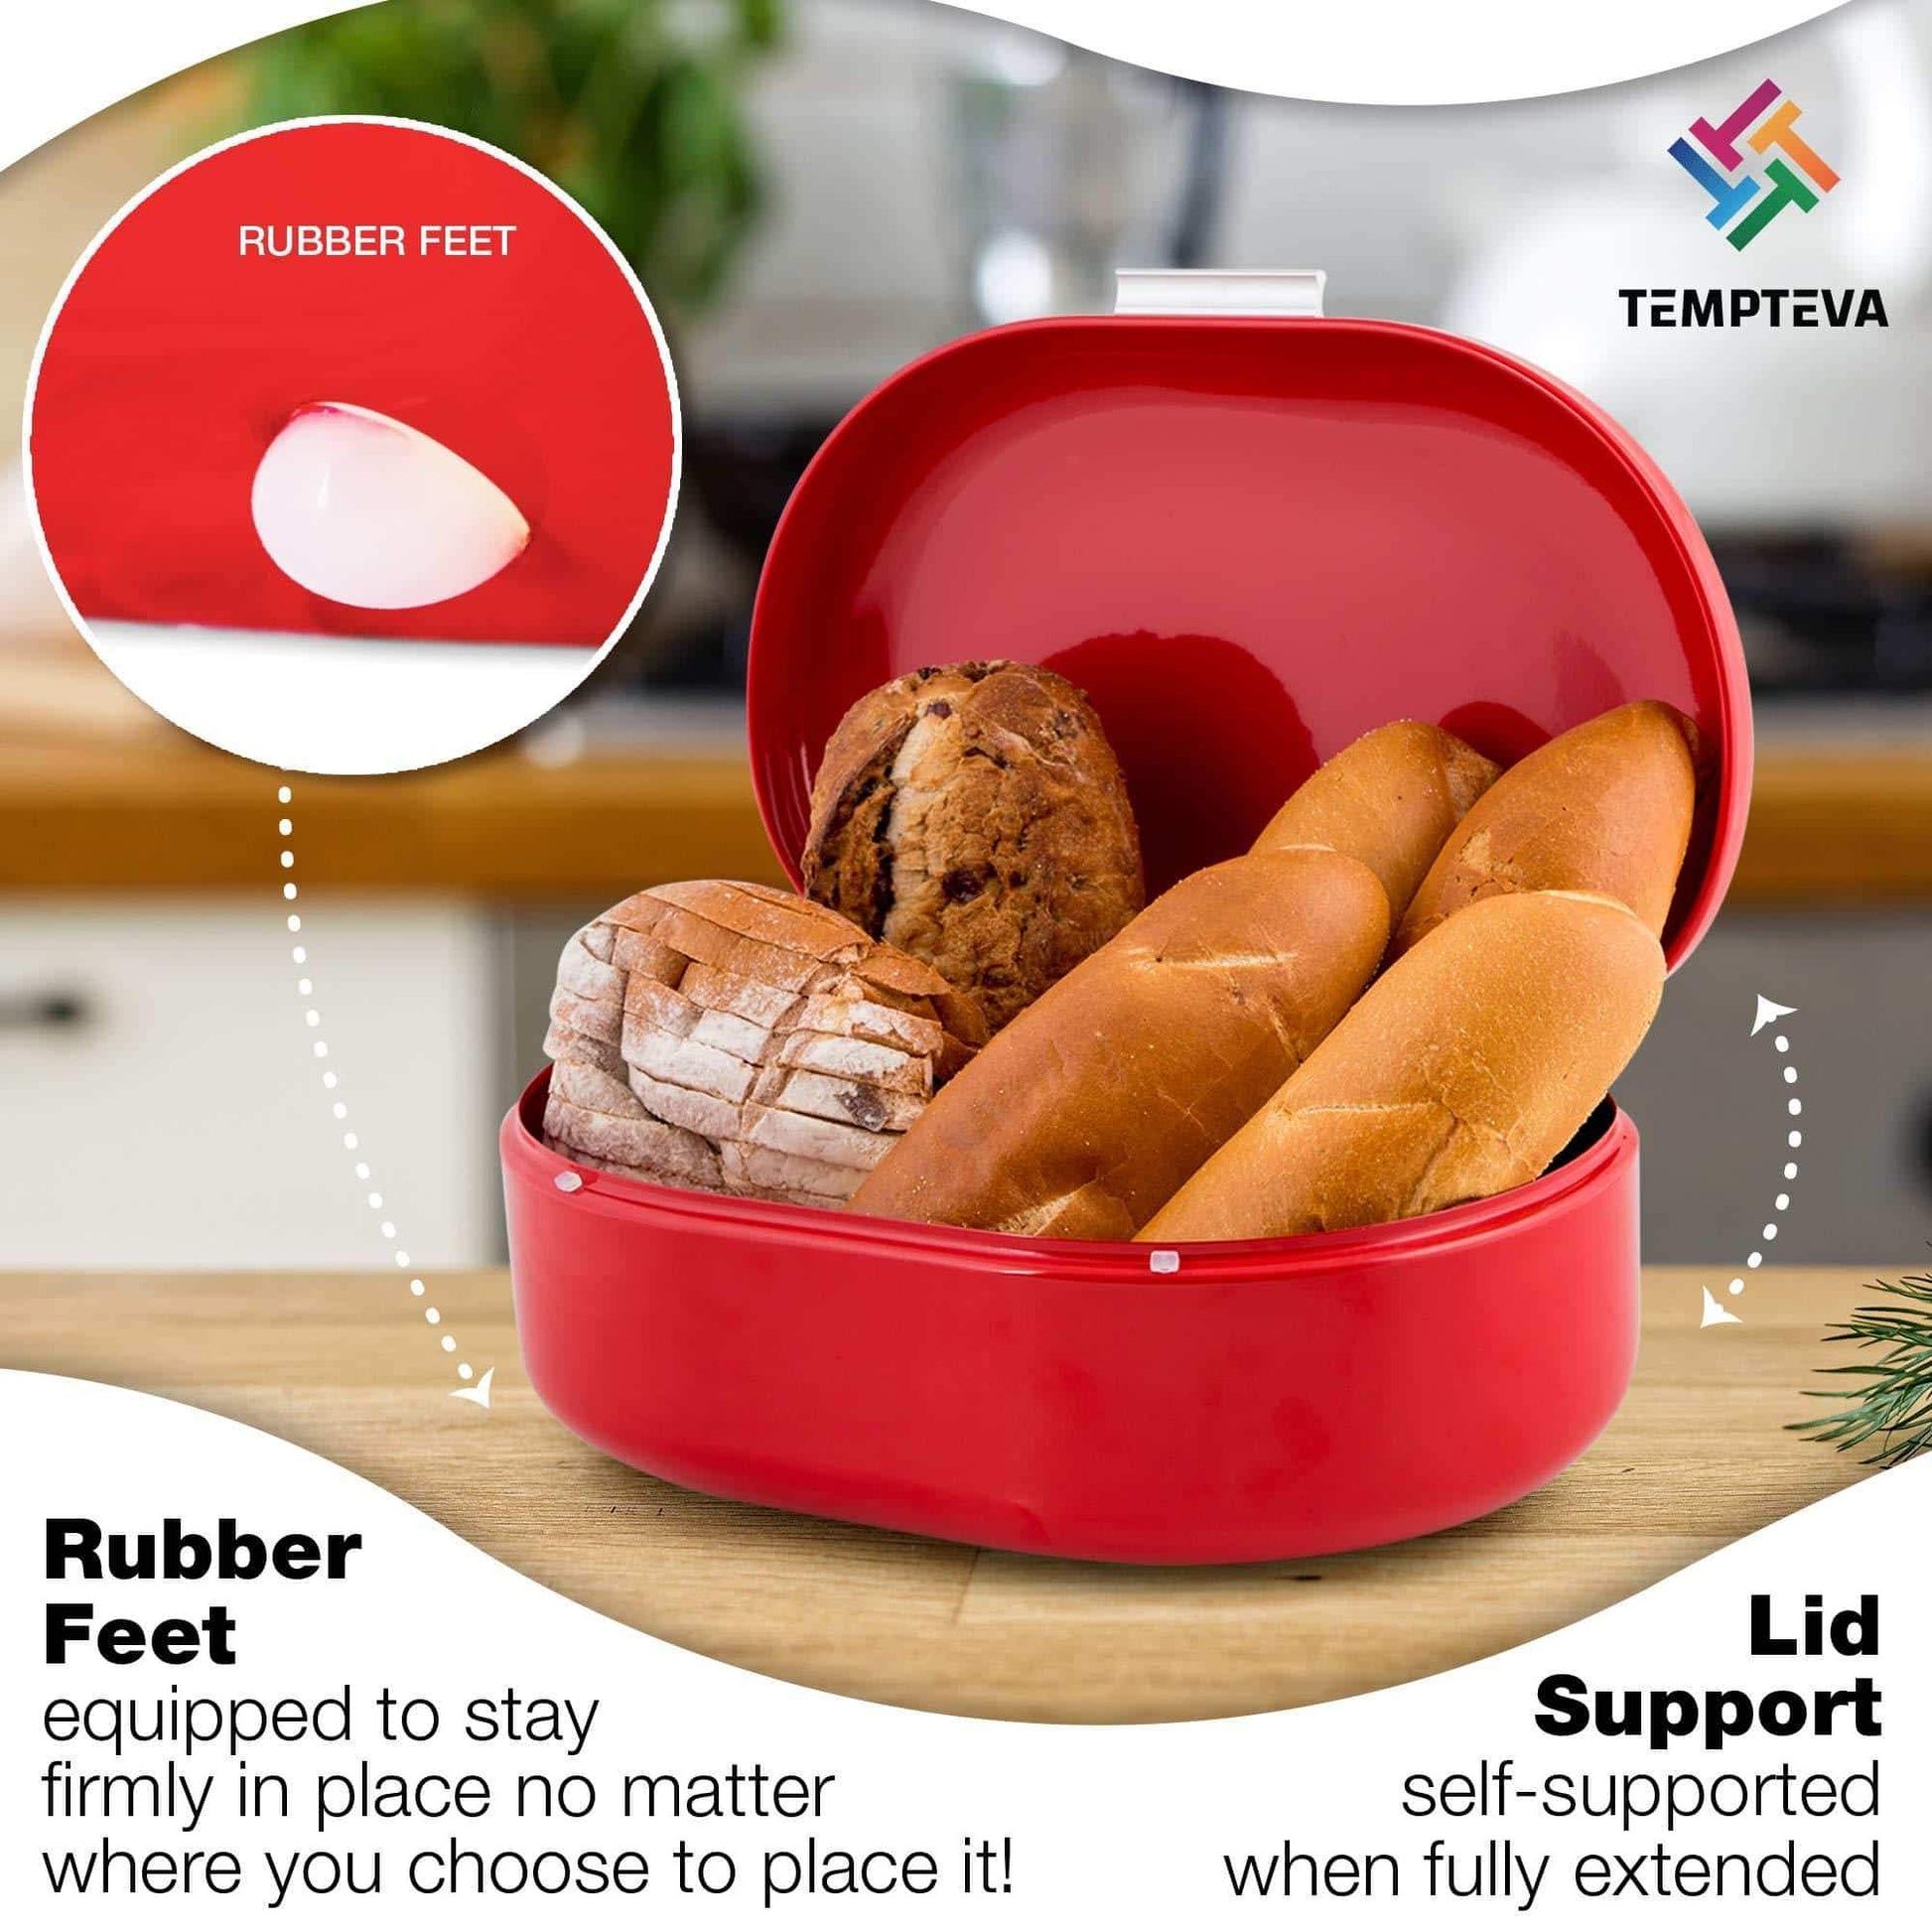 Order now bread box red carbon steel large capacity sturdy metal food storage containers and bread boxes for kitchen counters retro countertop breadbox for loaves 15 7 x 10 8 x 7 inches